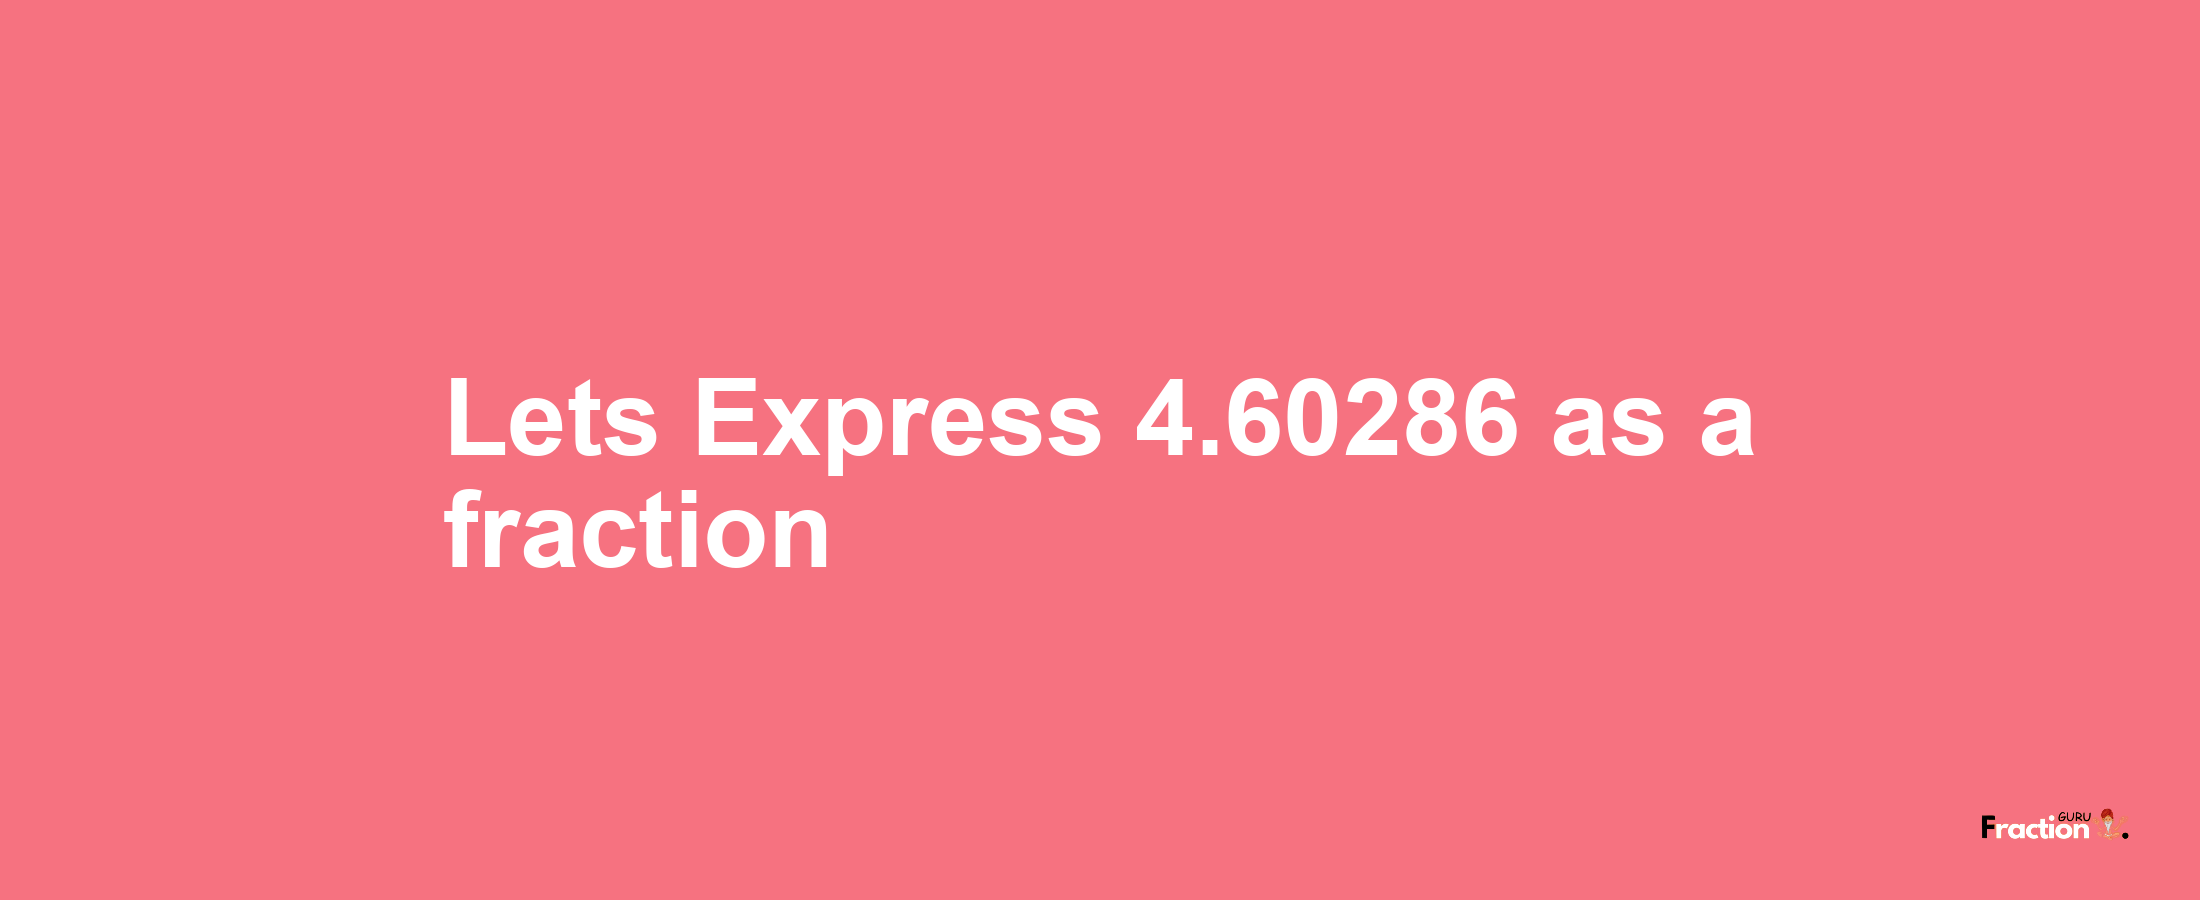 Lets Express 4.60286 as afraction